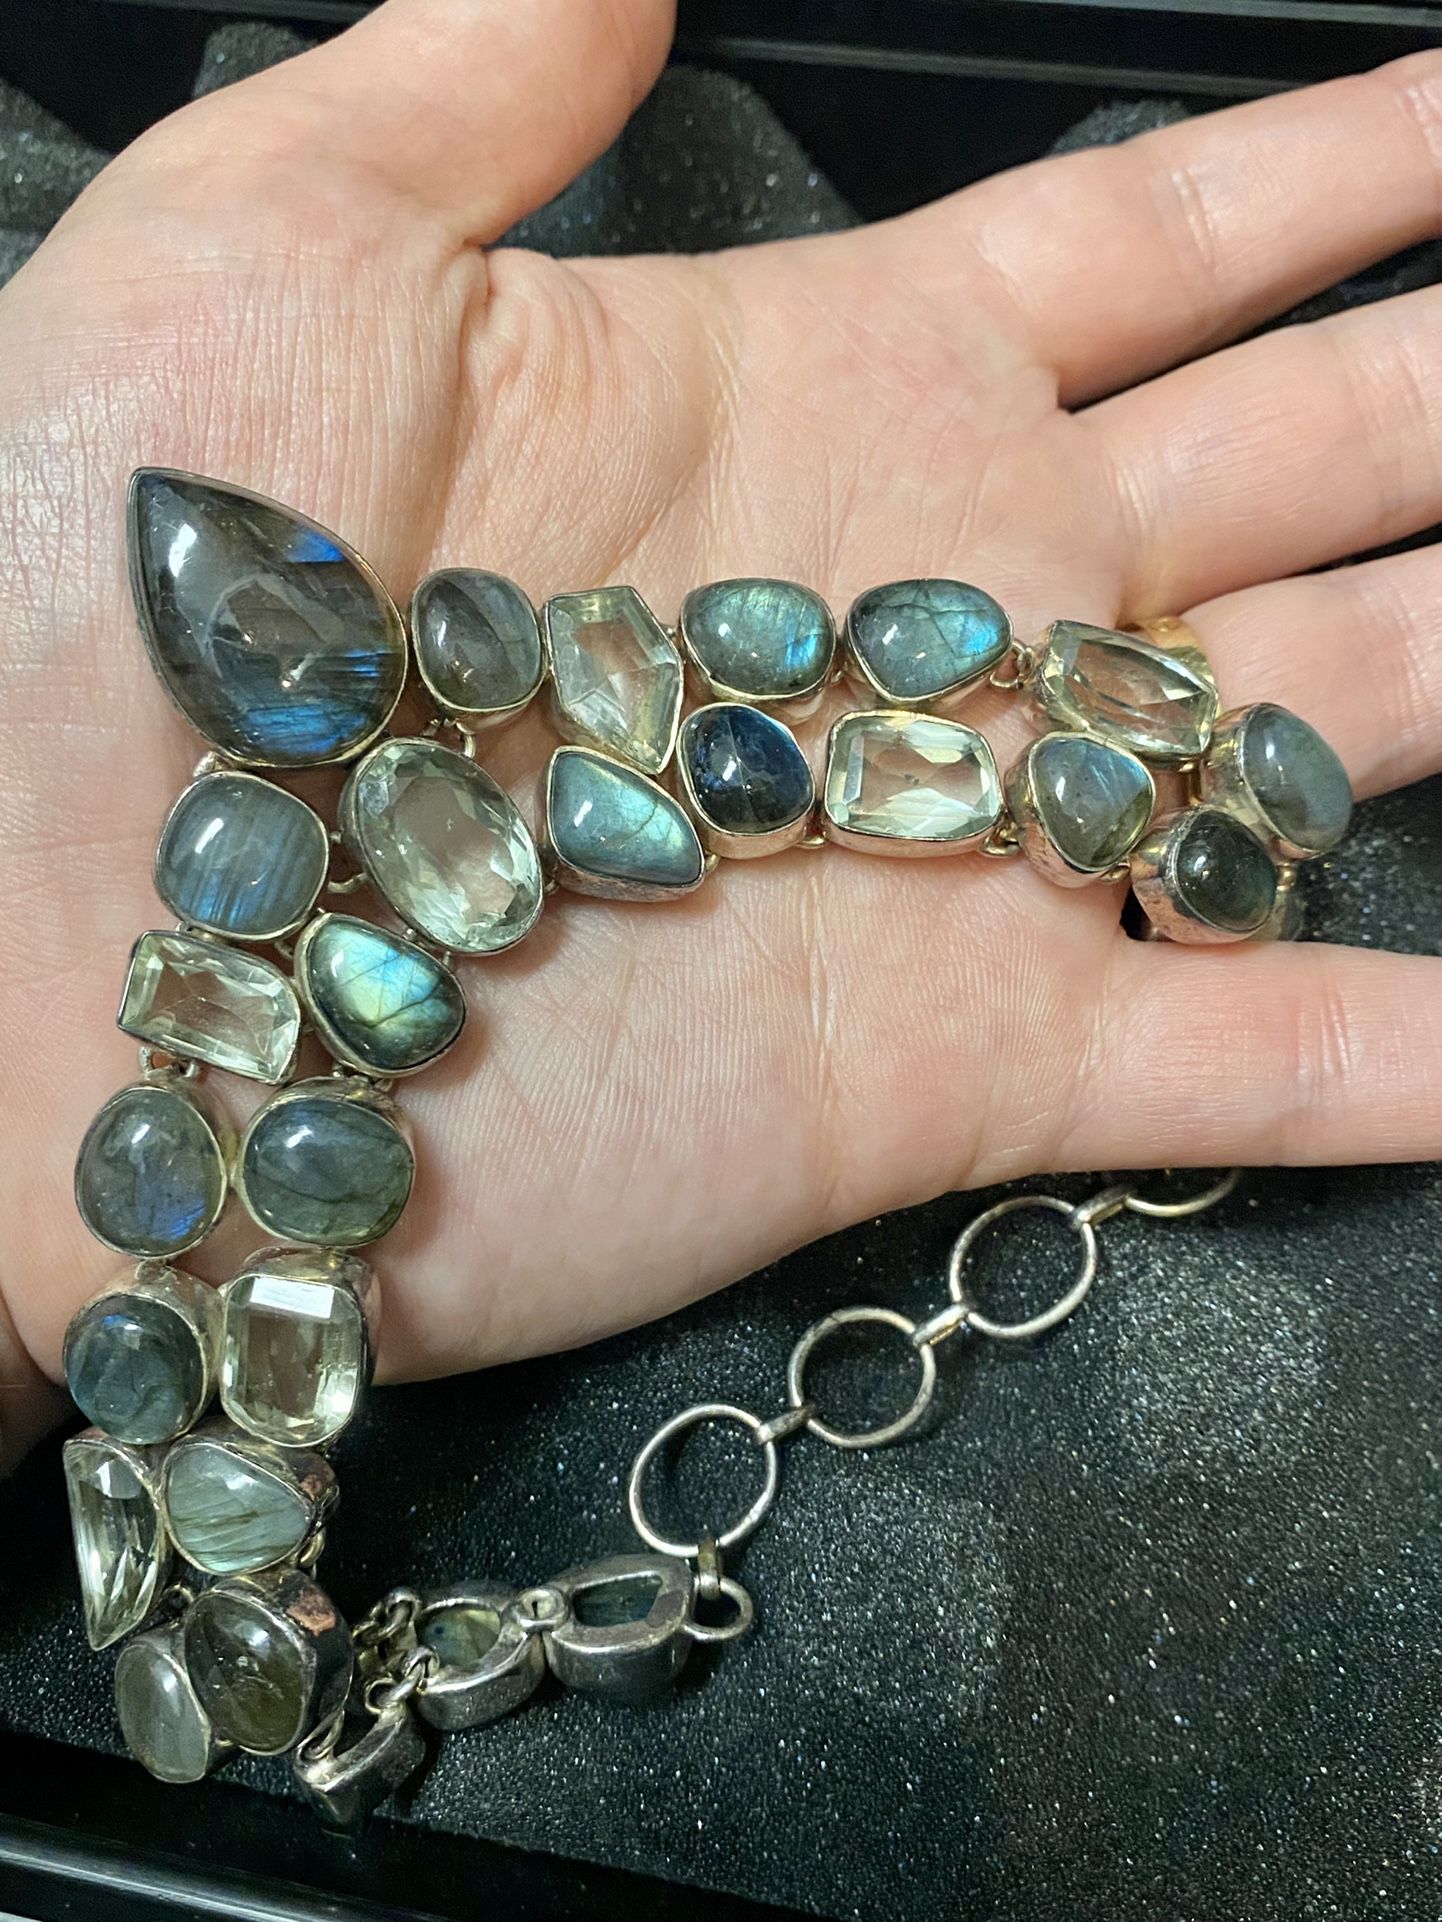 Handcrafted Moonstone Polished Crystal Labradorite Chain Link Necklace